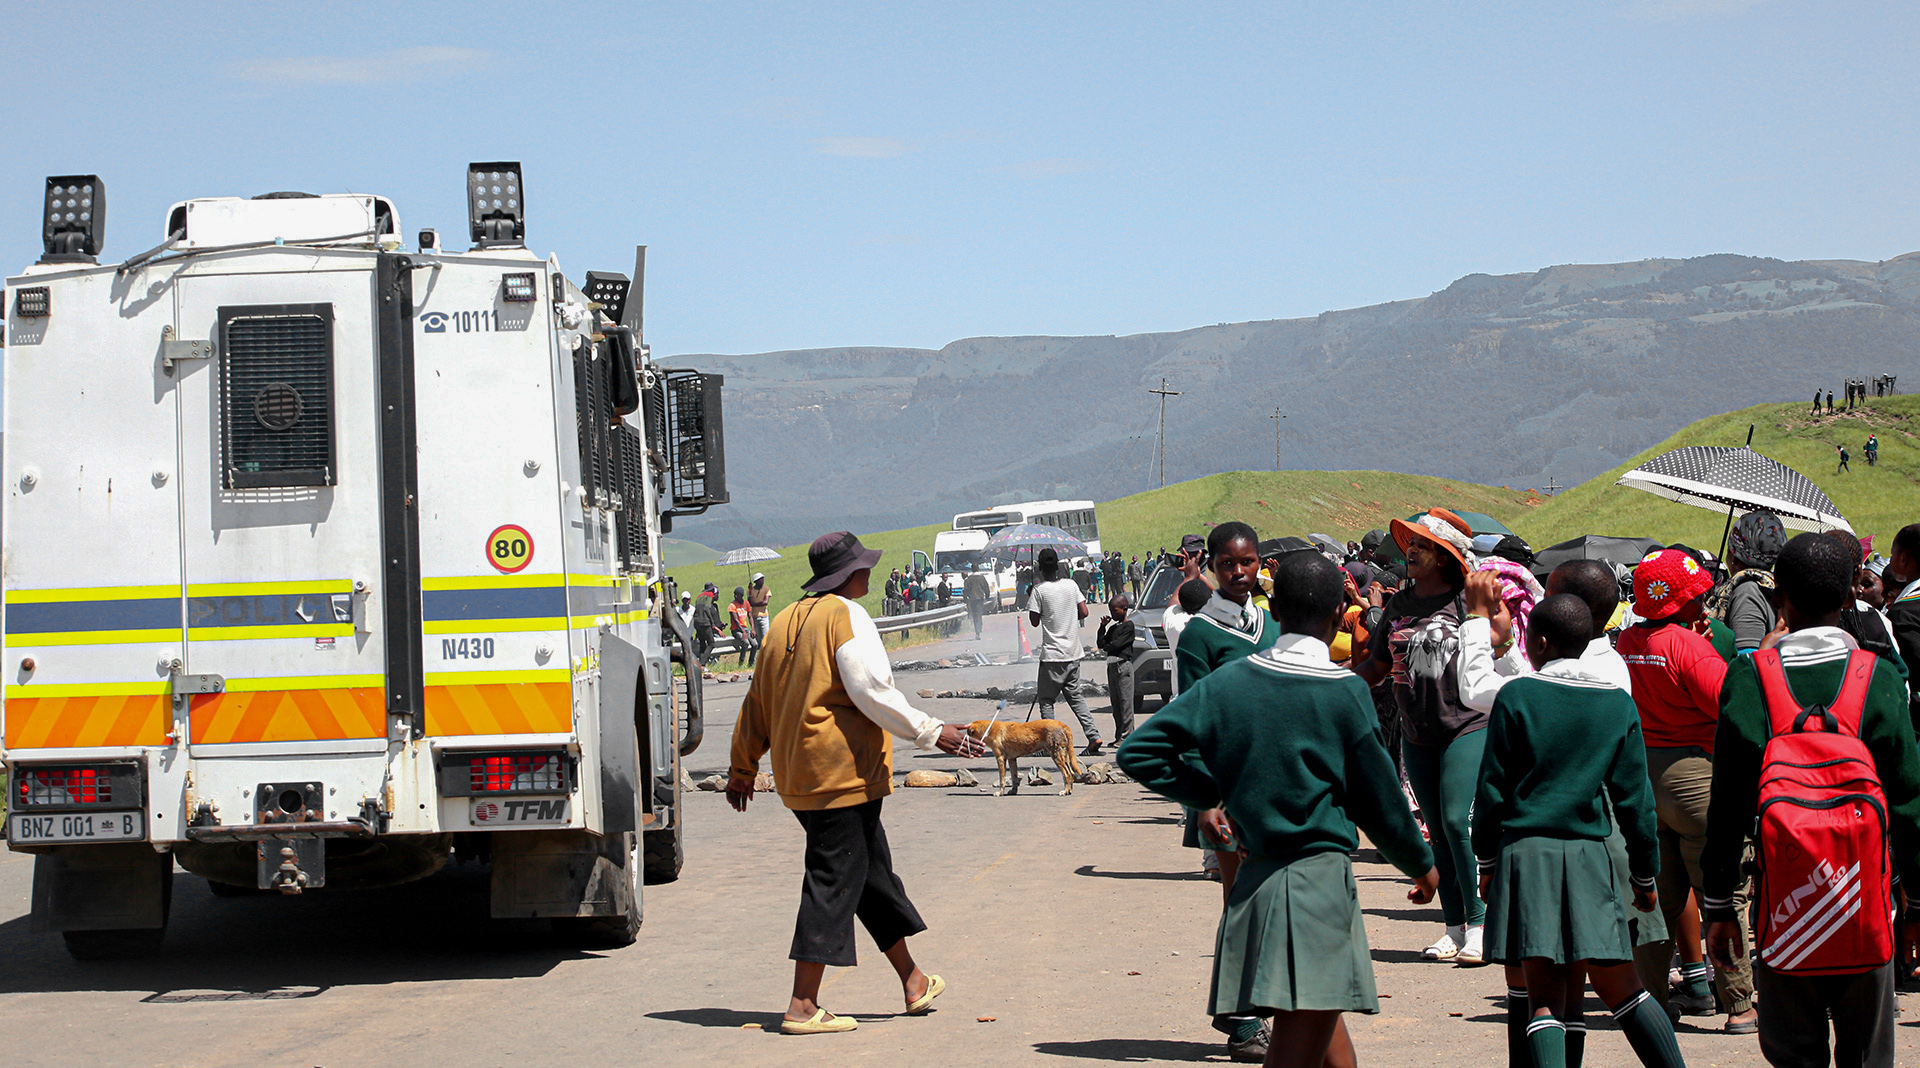 eastern cape school protest